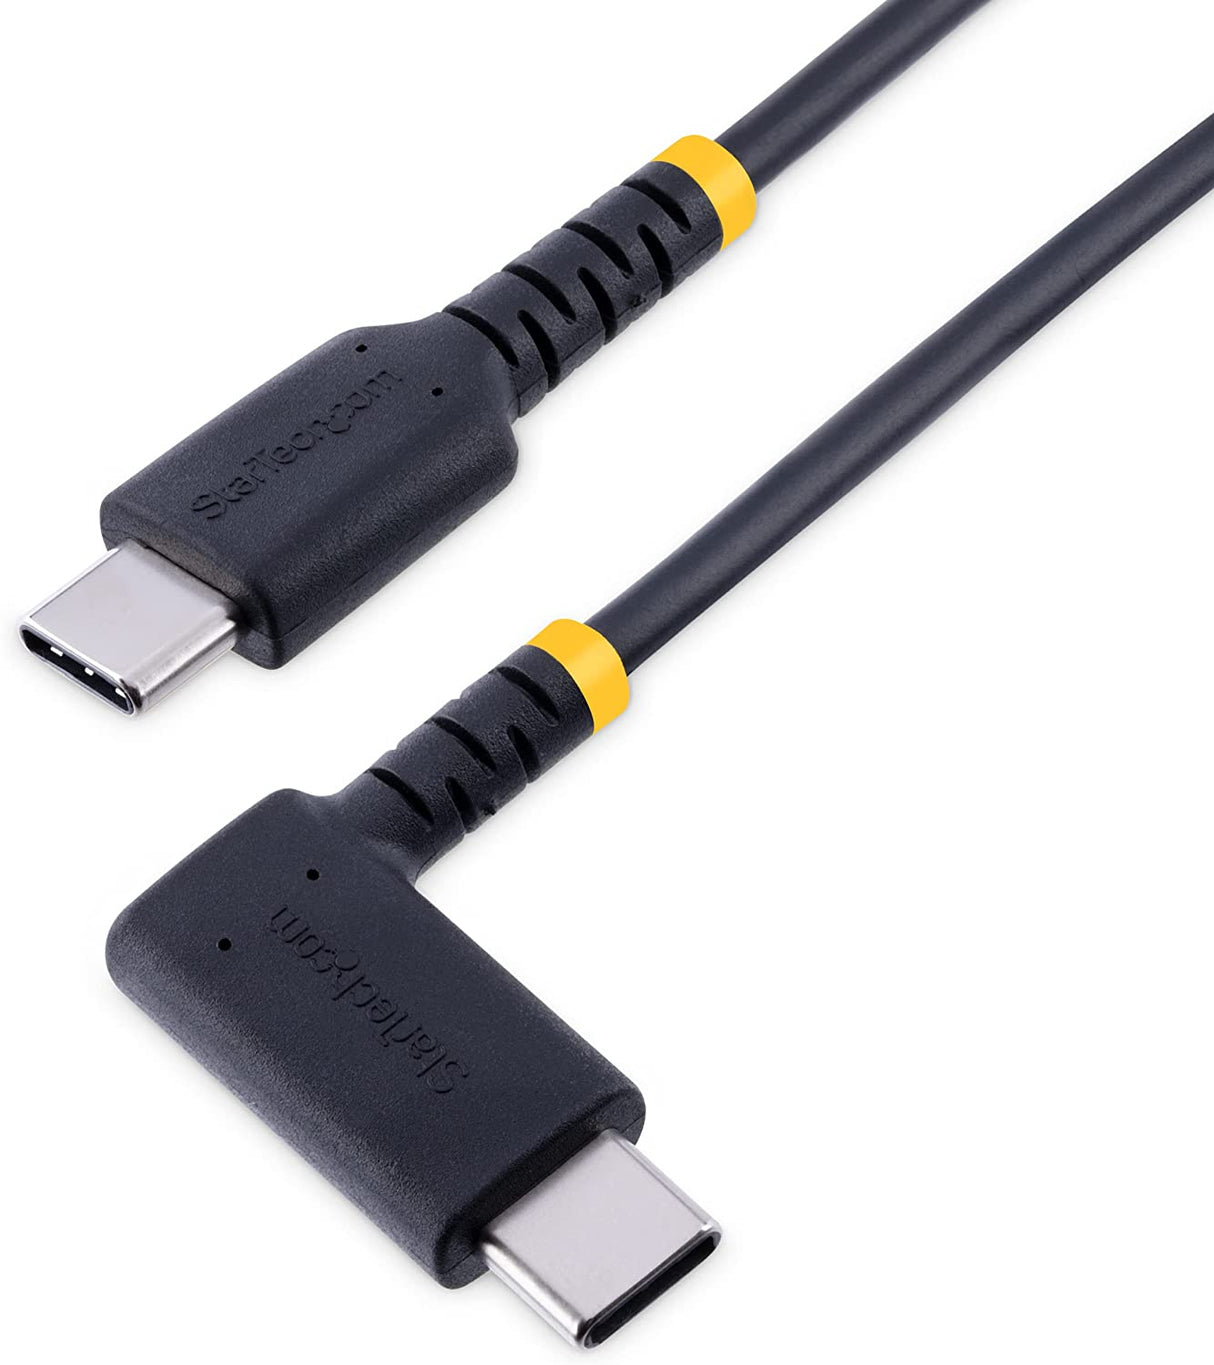 StarTech.com 6ft (2m) USB C to C Charging Cable Right Angle - 60W PD 3A - Heavy Duty Fast Charge USB-C Cable - USB 2.0 Type-C - Rugged Aramid Fiber - USB Charging Cord (R2CCR-2M-USB-CABLE)